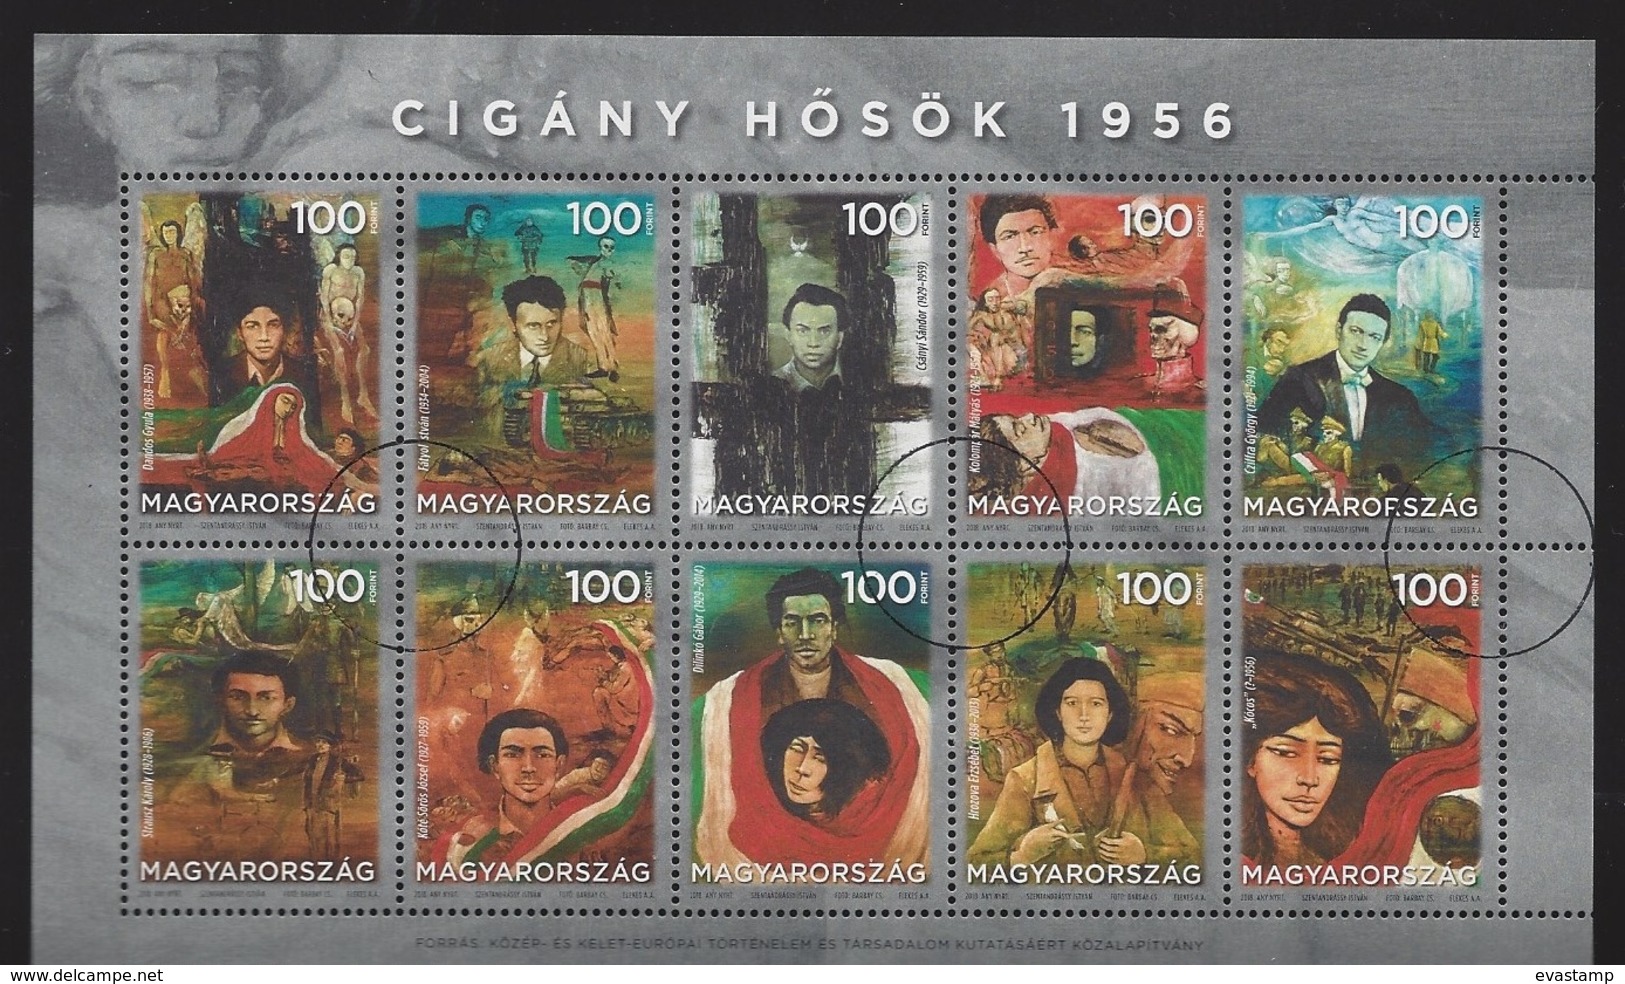 HUNGARY - 2018. Minisheet - Gipsy Heroes Of The Revolution 1956. USED!!! - Used Stamps